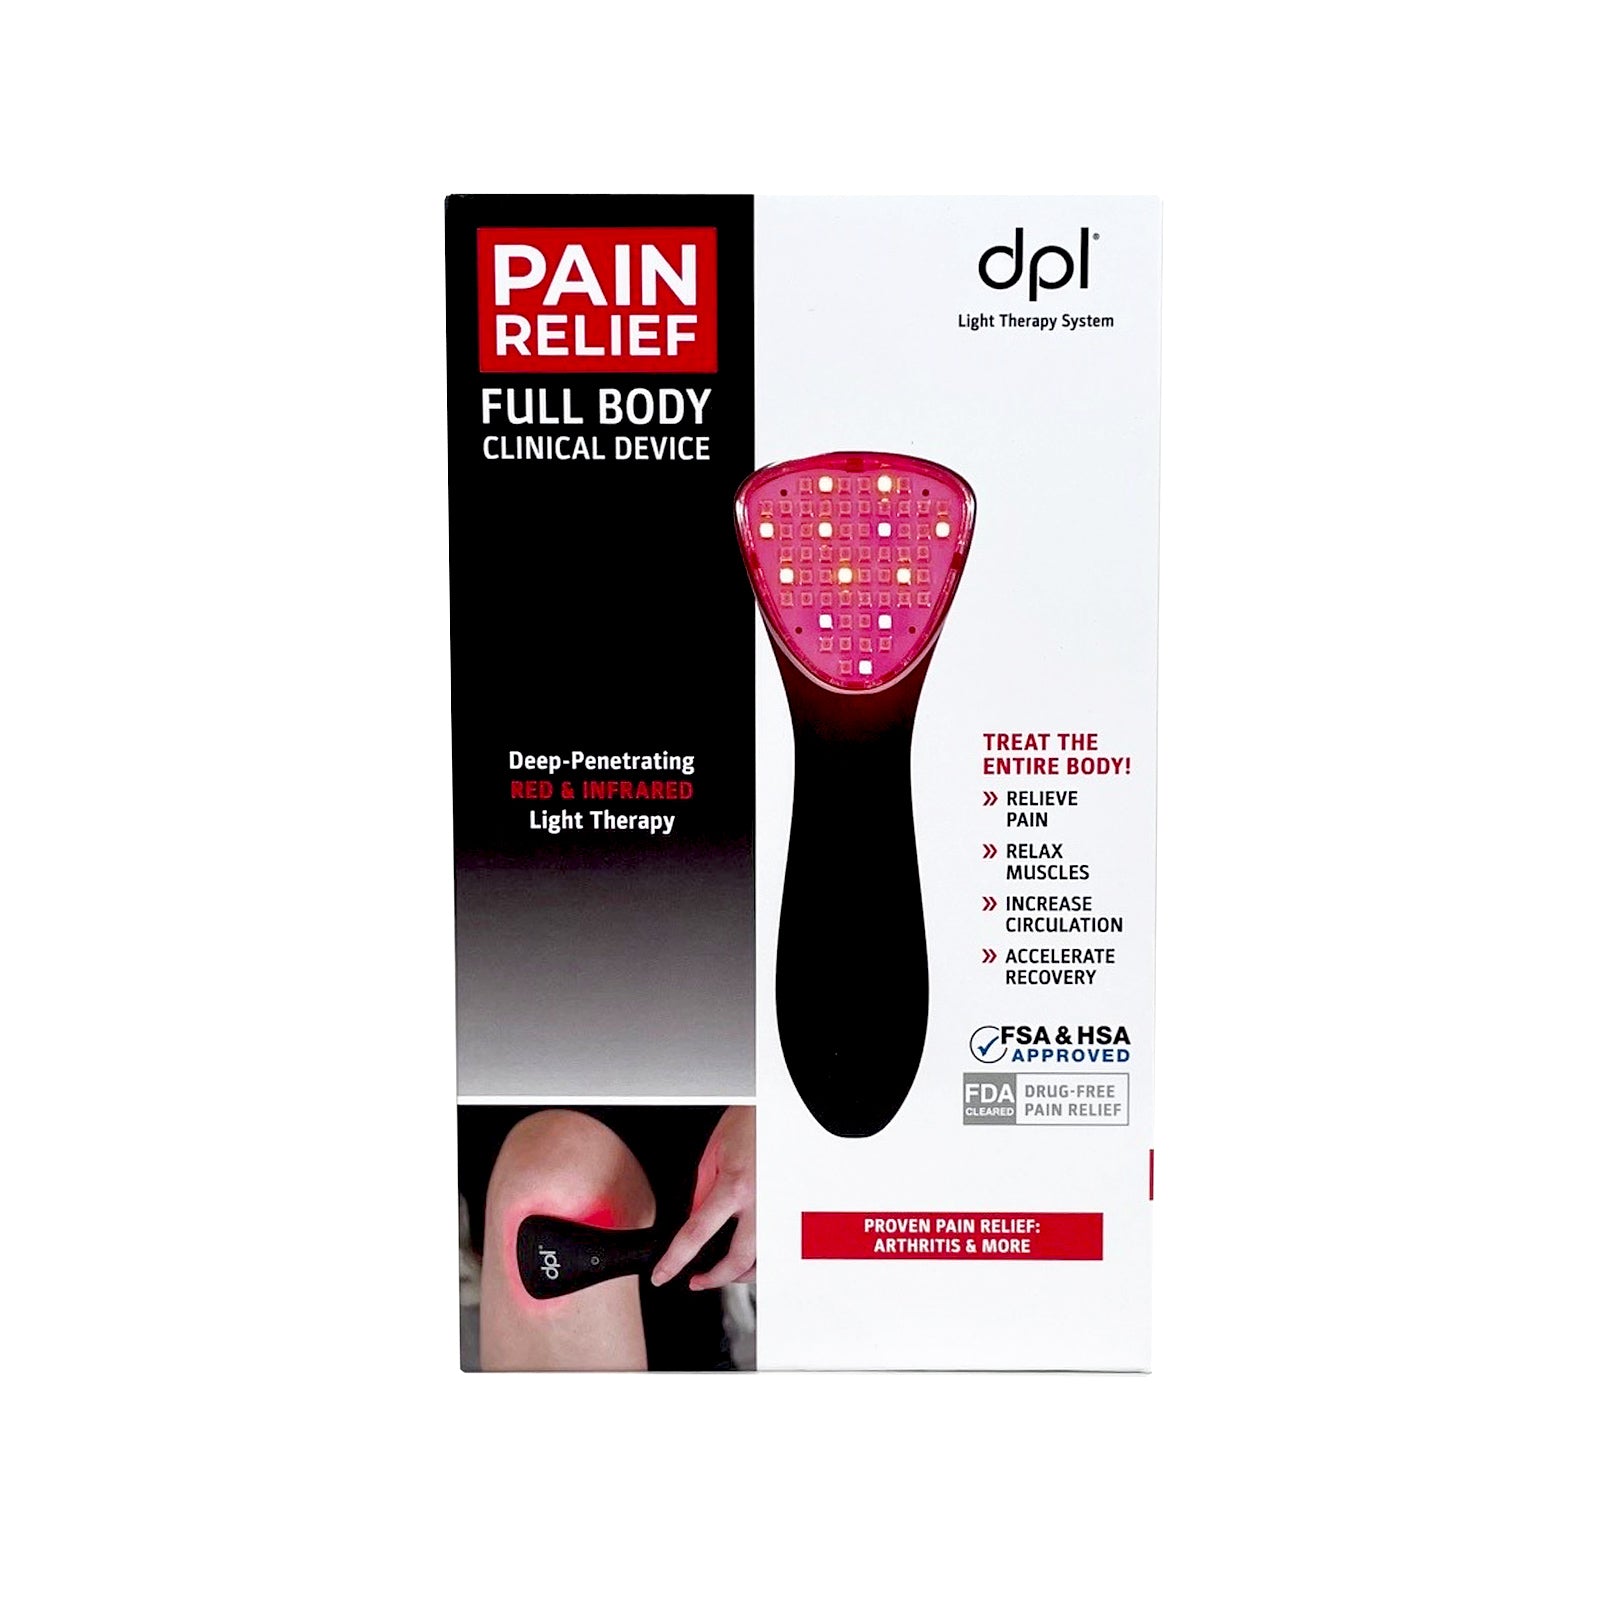 The front of the packaging for the DPL Clinical Handheld Light Therapy for Pain Relief